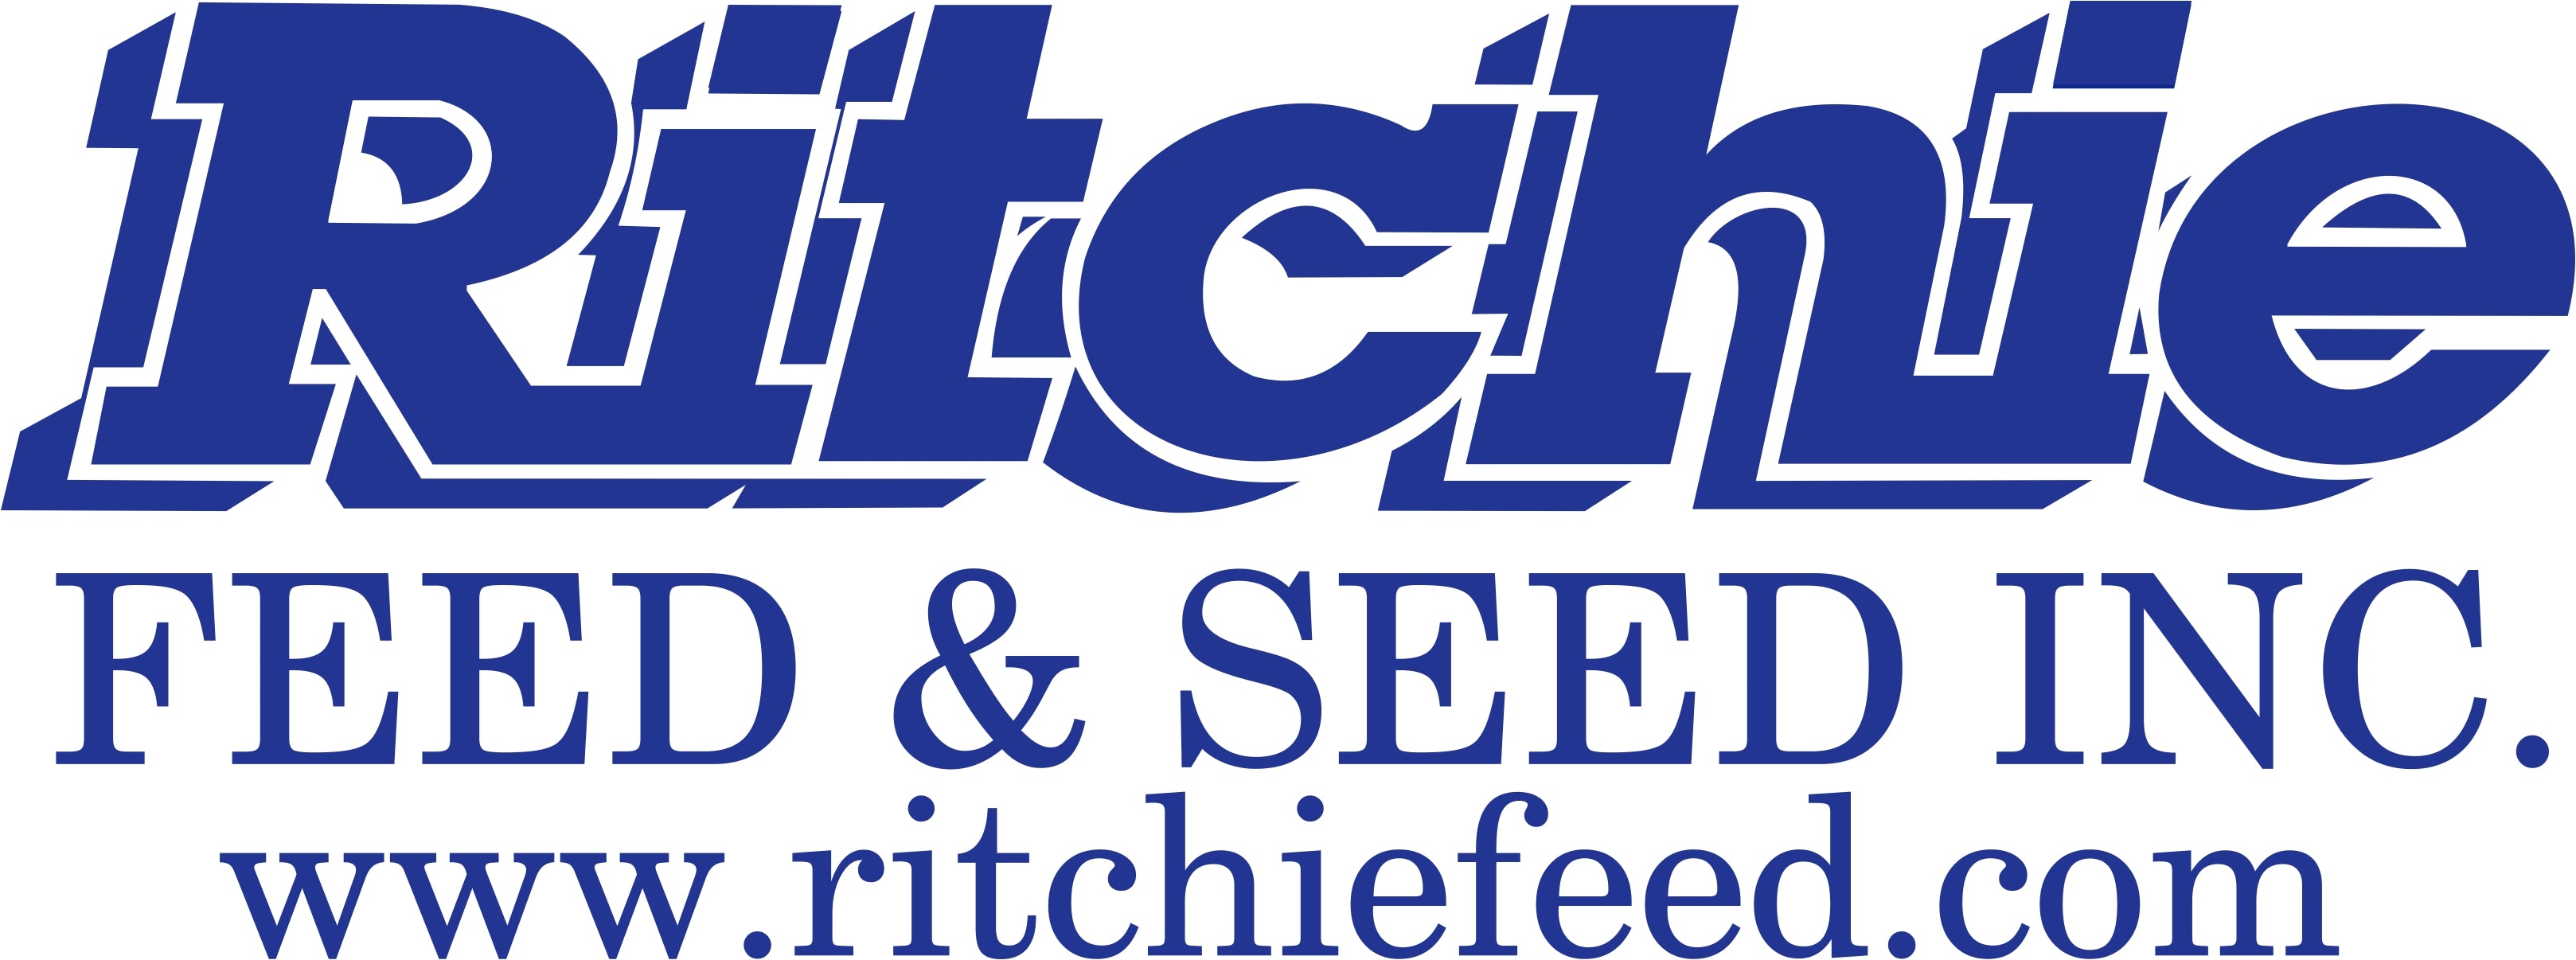 www.ritchiefeed.com